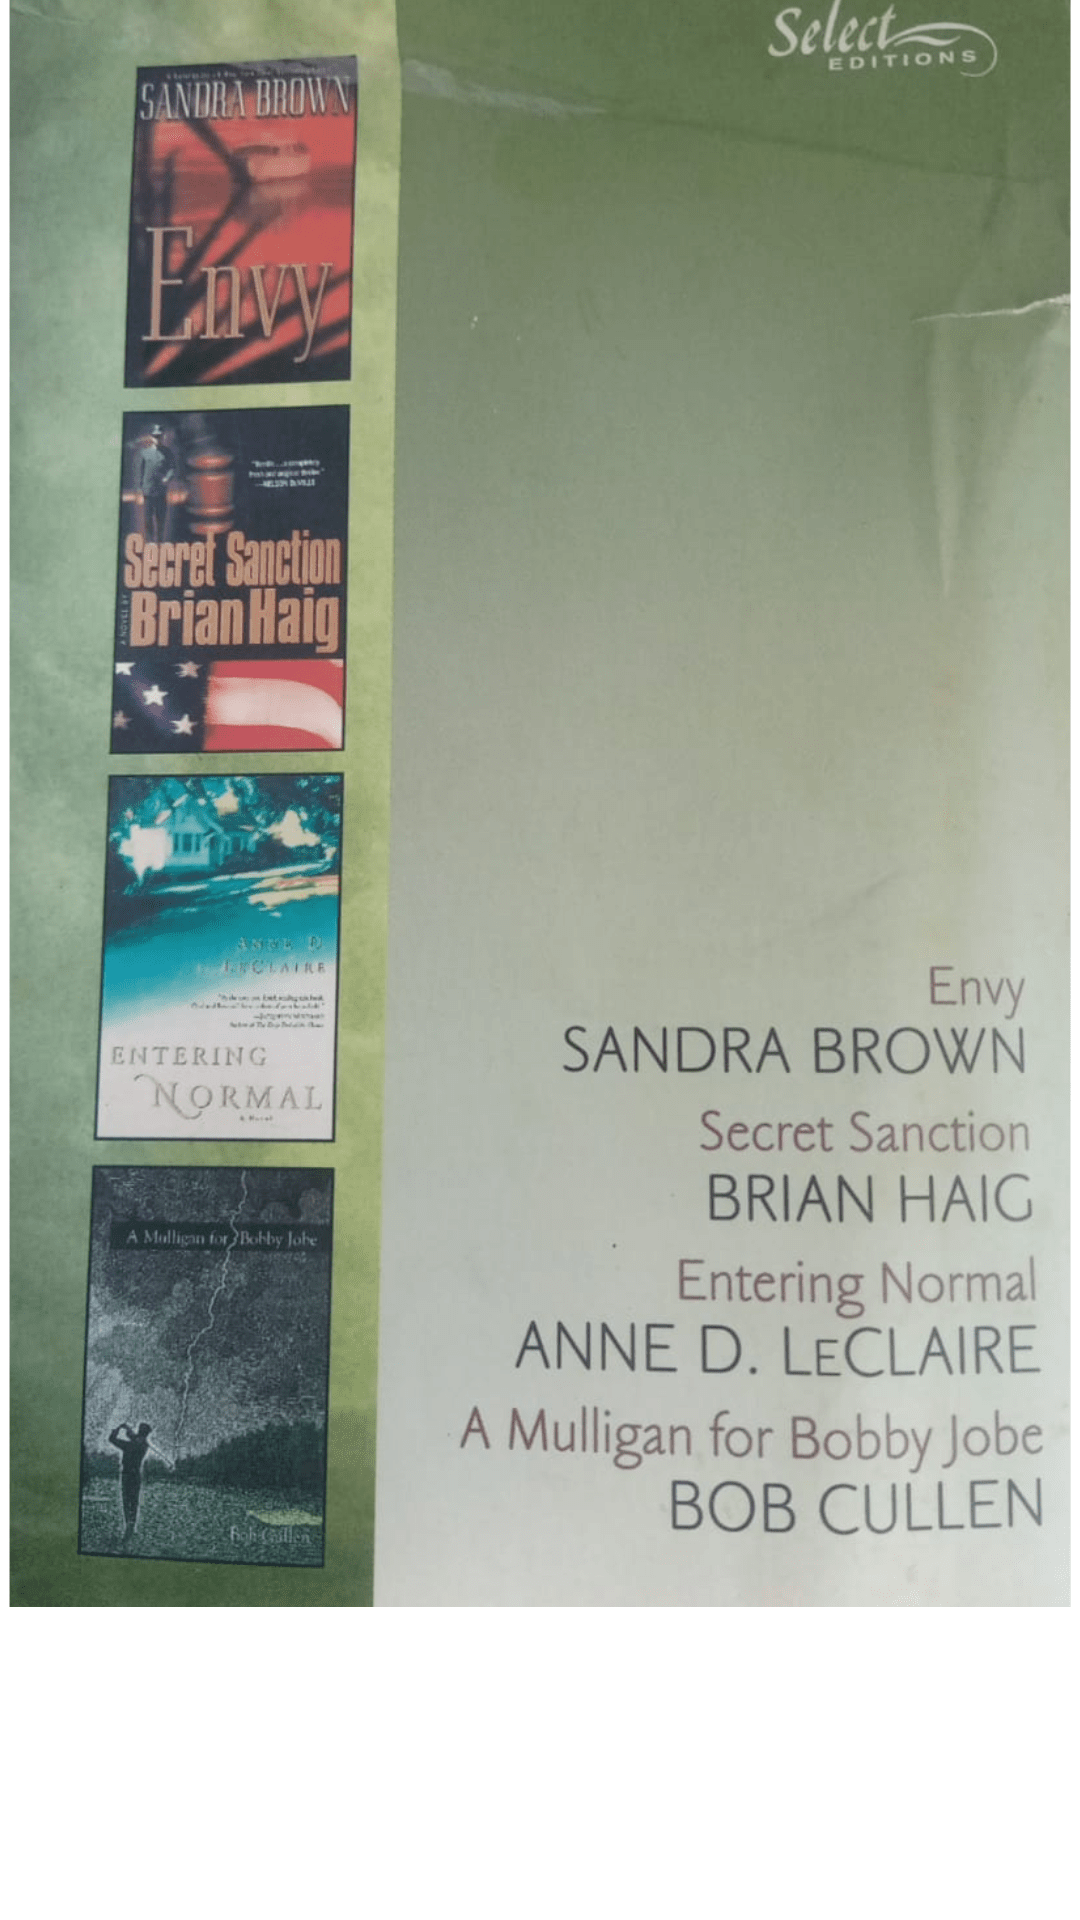 Reader's Digest Select Editions: Envy by Sandra Brown, Entering Normal by Anne Leclair, A Mulligan for Bobby Jobe by Bob Cullen and Secret Sanction by Brian Haig